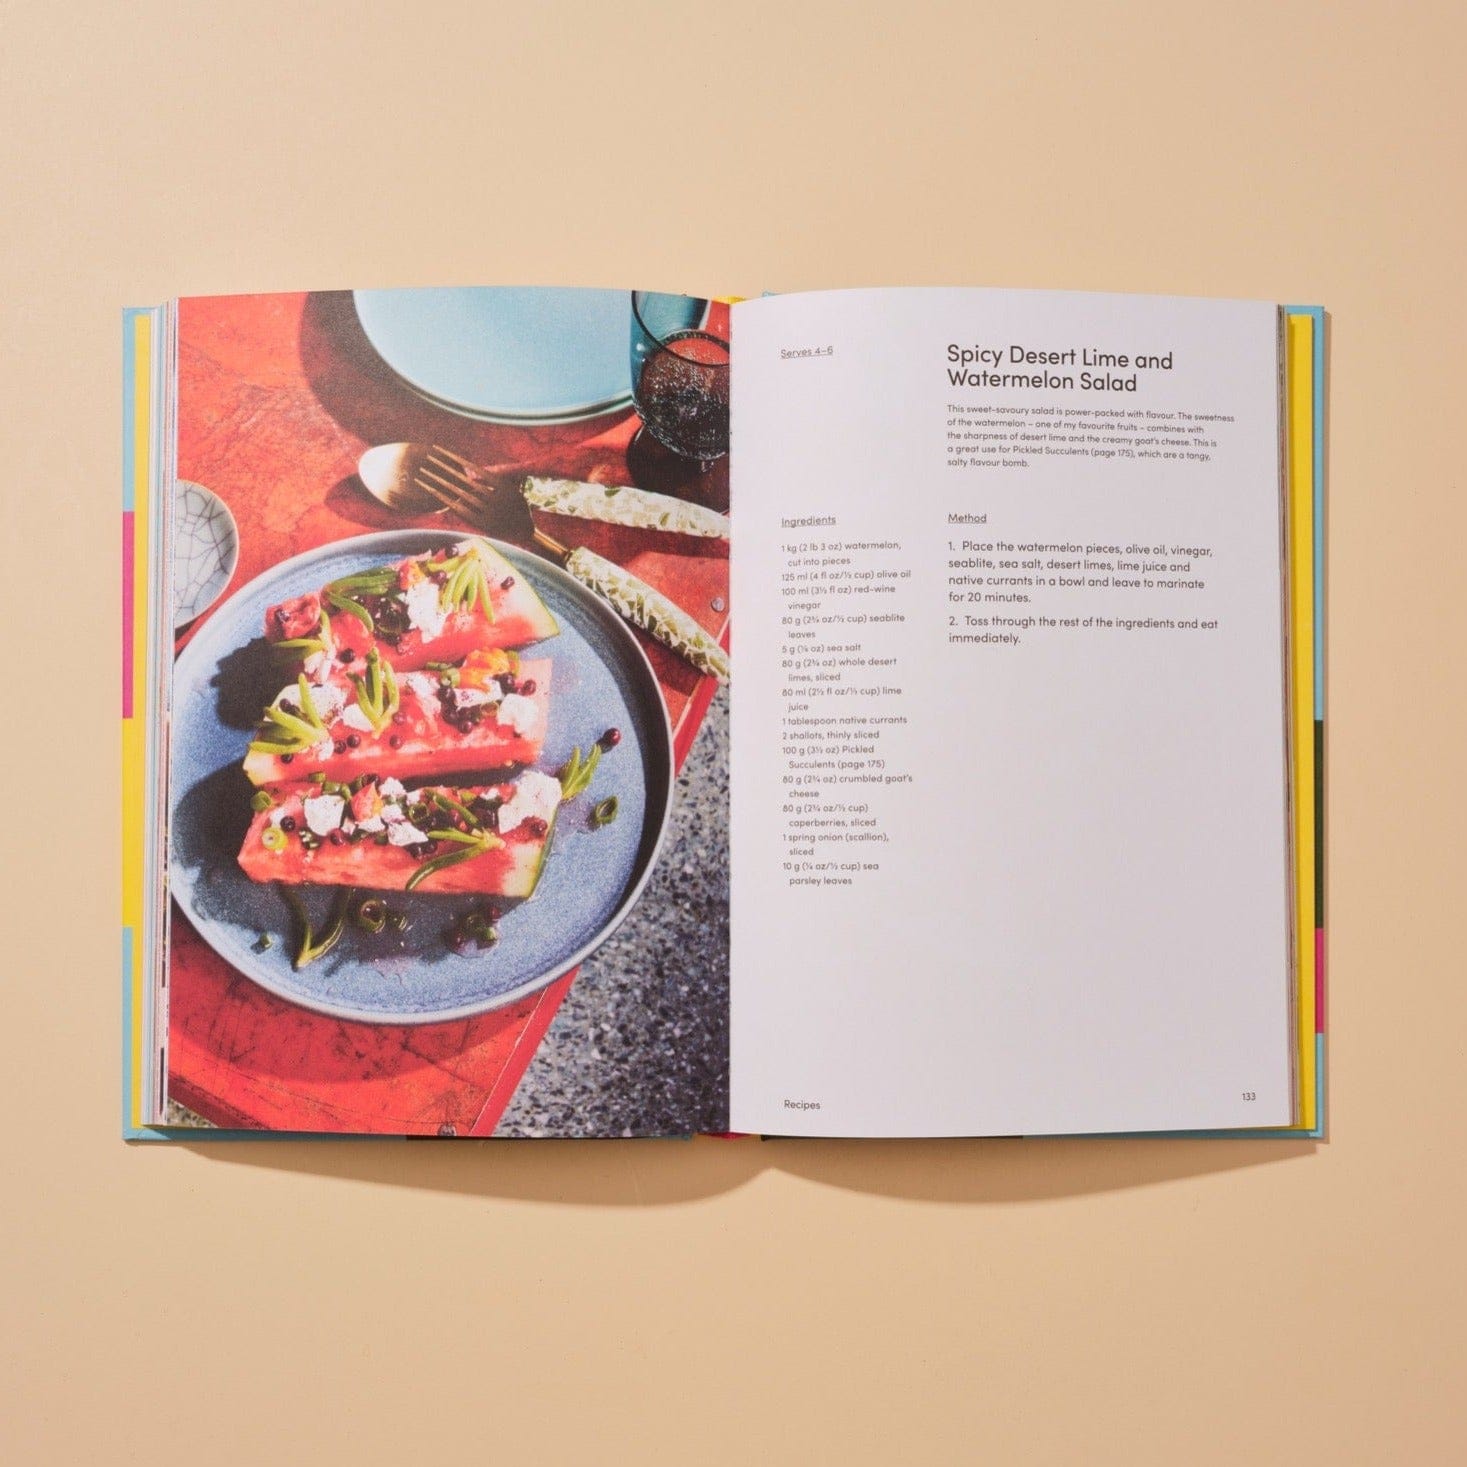 This image displays Mabu Mabu Spicy Desert Lime and Watermelon Salad - a recipe included in the gift bundle 'The Native Plate'